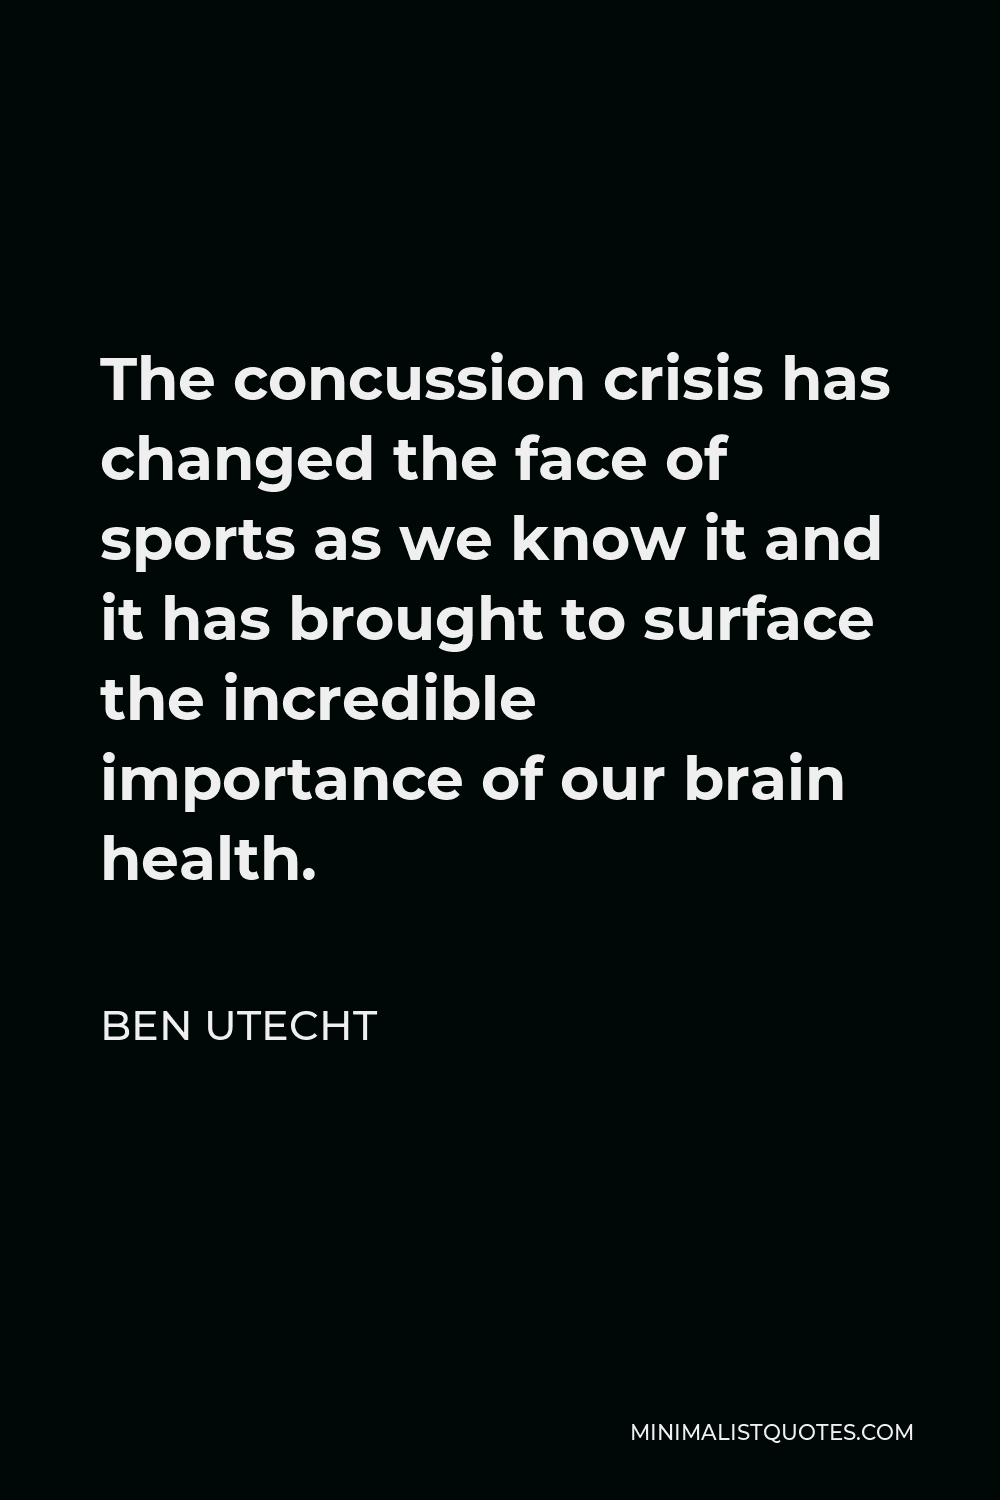 Ben Utecht Quote - The concussion crisis has changed the face of sports as we know it and it has brought to surface the incredible importance of our brain health.